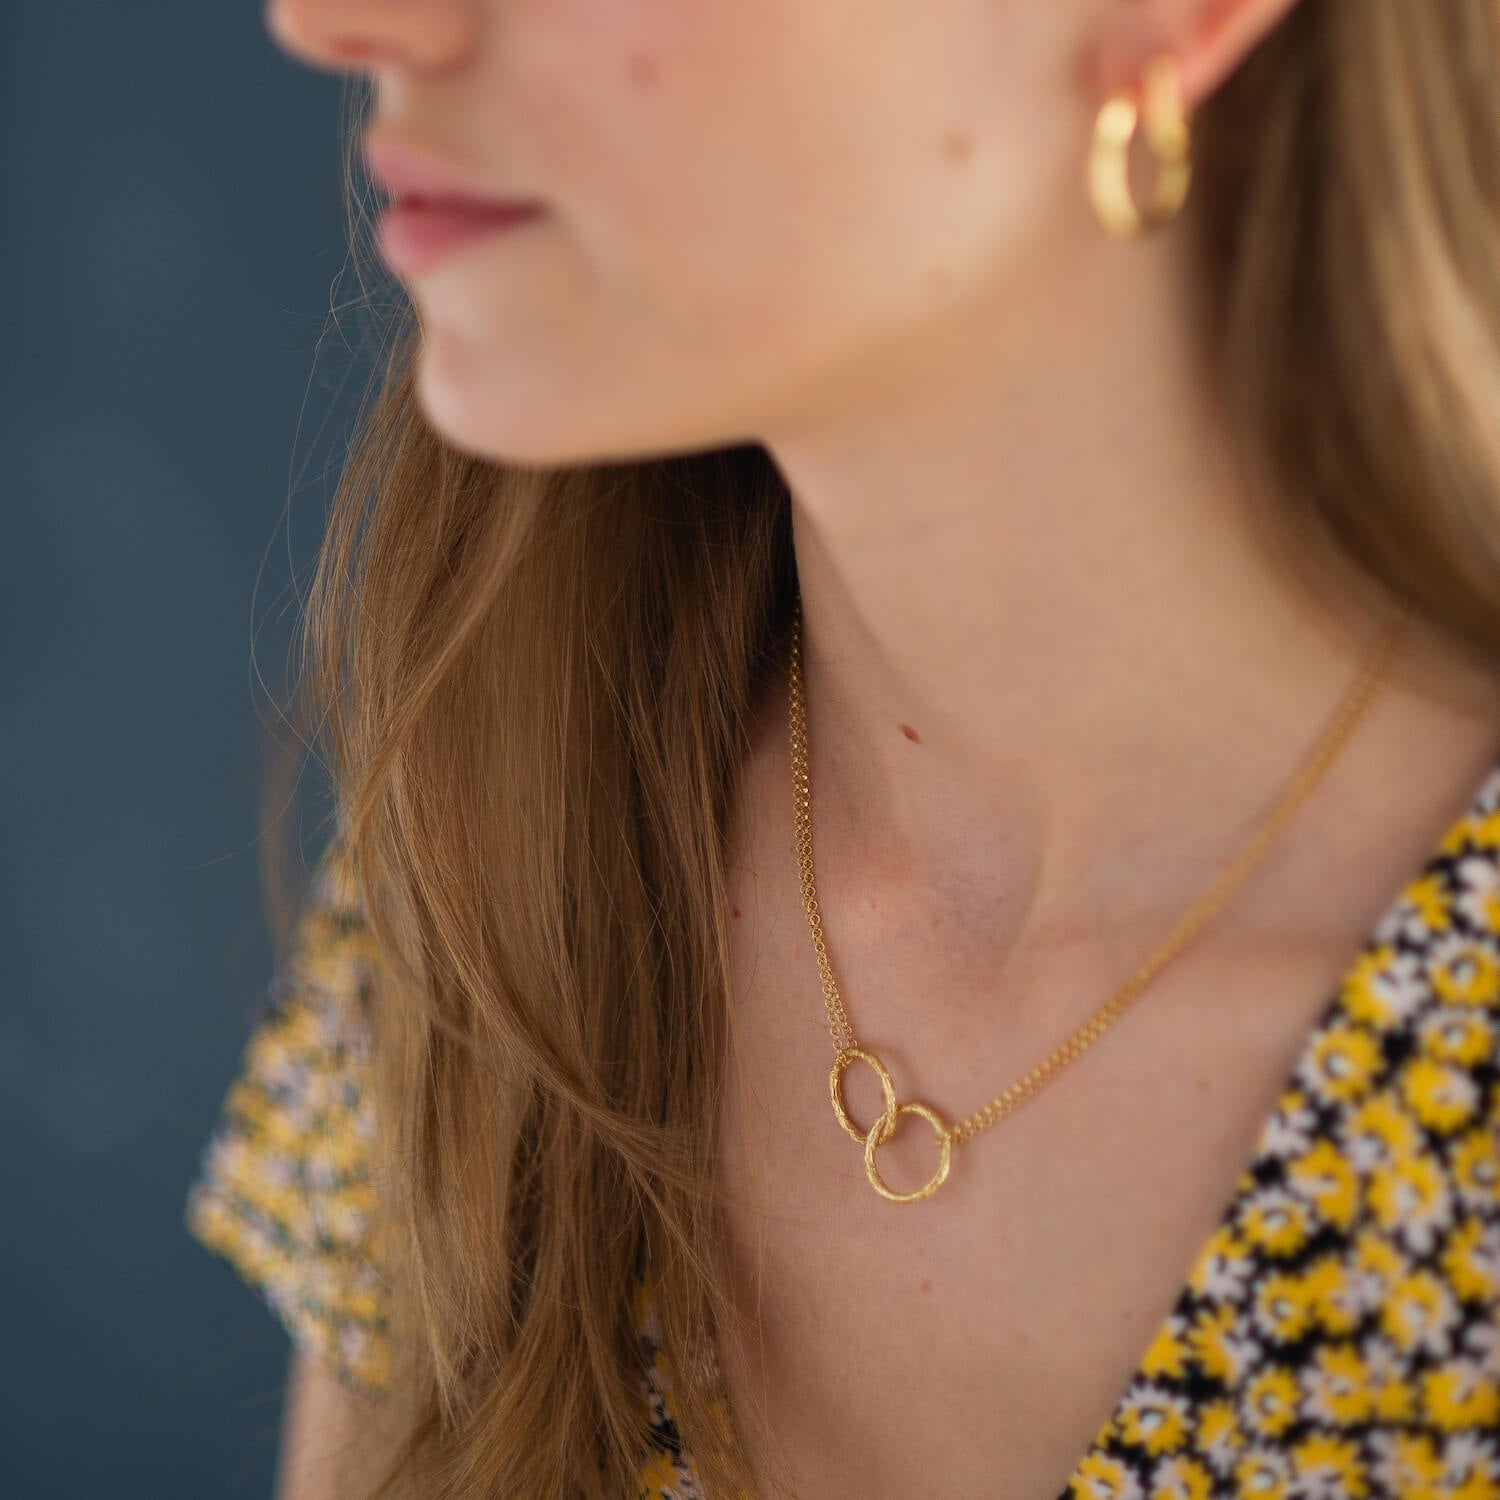 Woman wearing necklace with two joined rings in gold